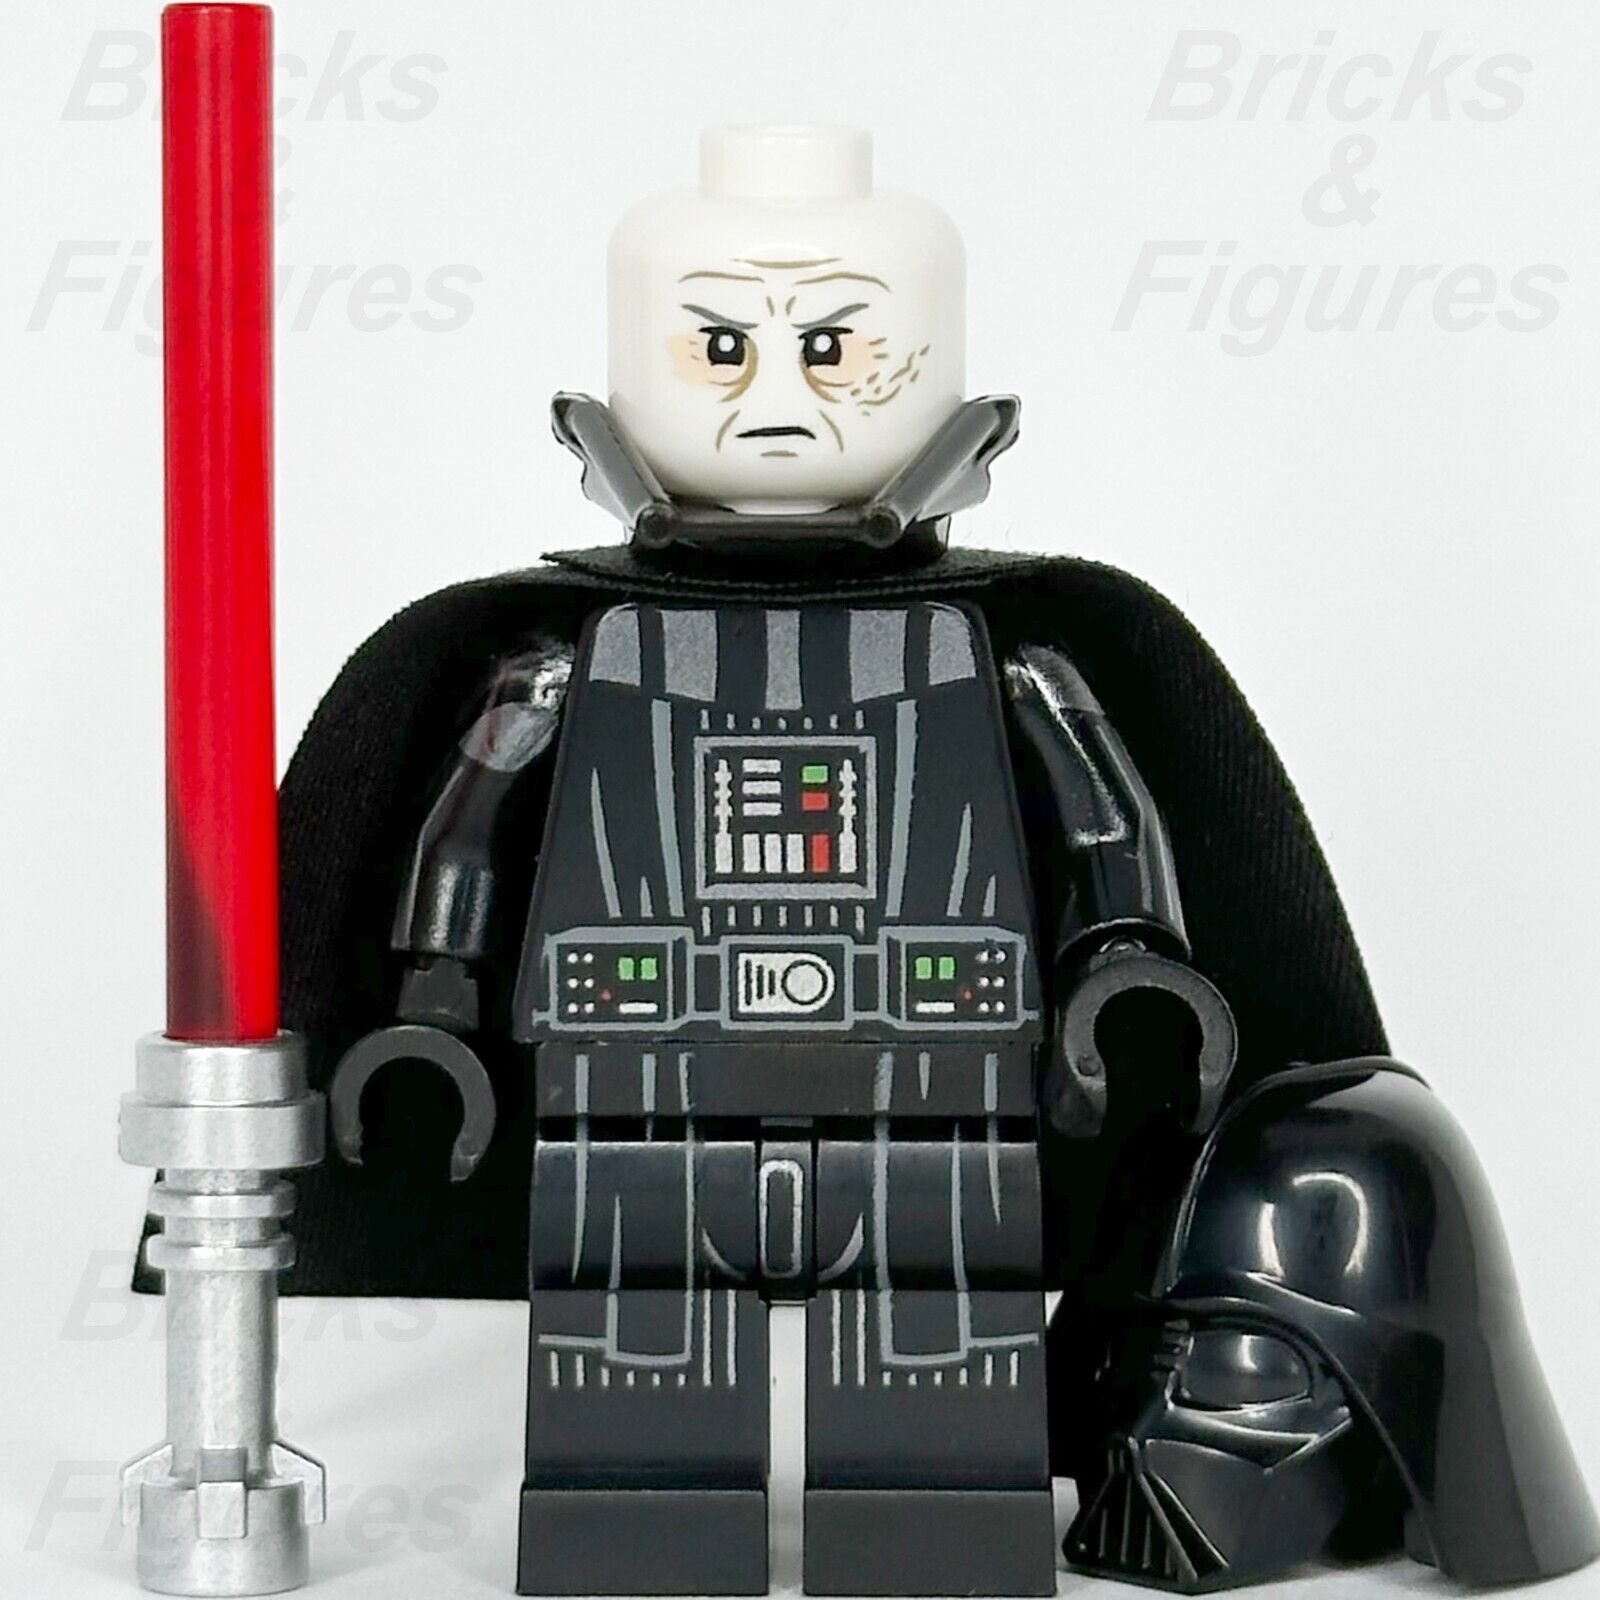 LEGO Star Wars Darth Vader Minifigure Printed Arms White Head Frown 75347 sw1273